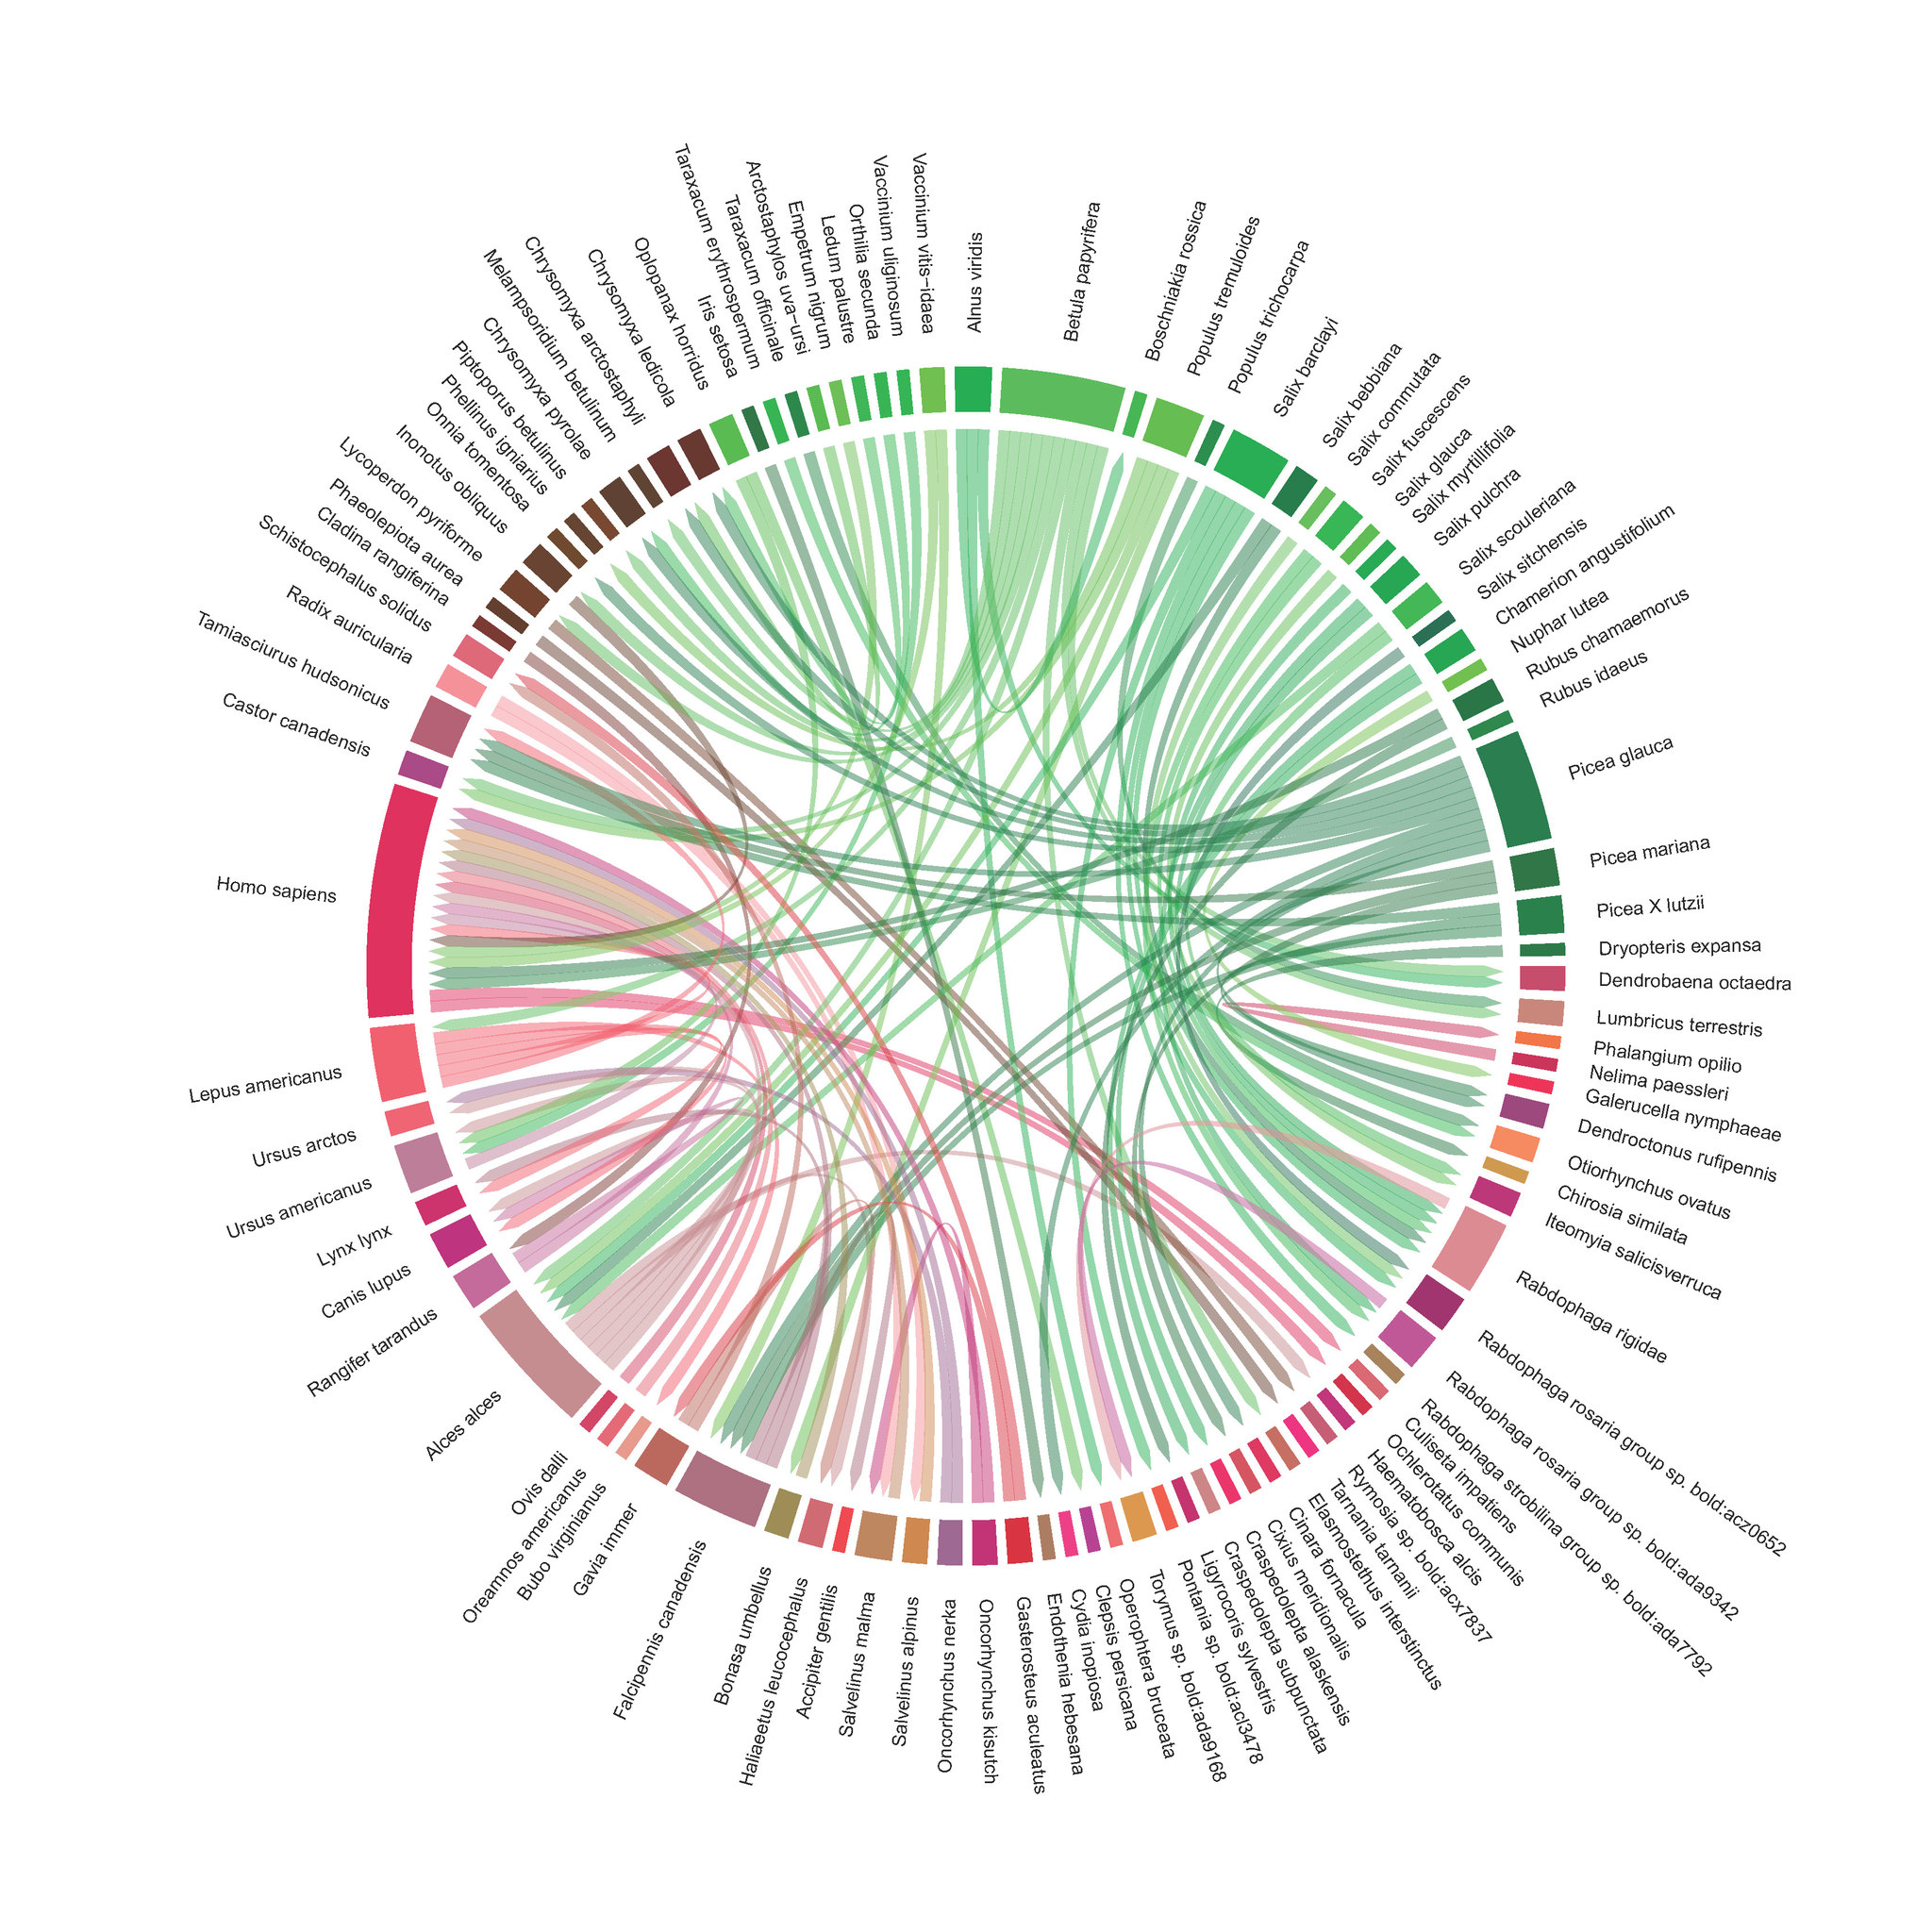 Why biodiversity matters: A food web showing 110 relationships among 98 species found on the Kenai Peninsula. Browns are fungi, reds are animals, and greens are plants. Note how humans (Homo sapiens) are part of our web.